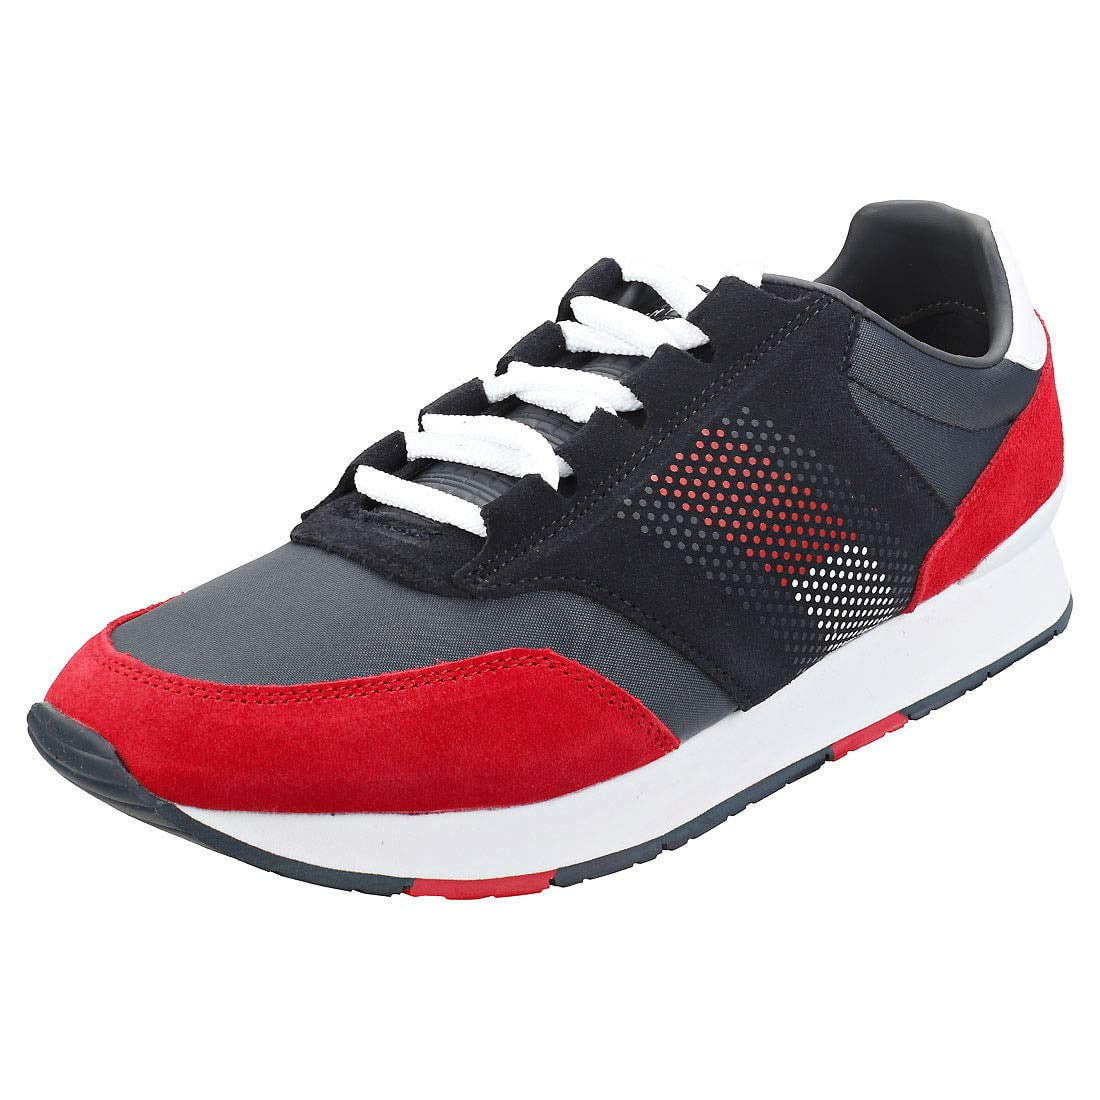 Tommy Hilfiger Corporate Material Mix Runner Mens Running Trainers in Red White Blue - 11 US Walmart.com